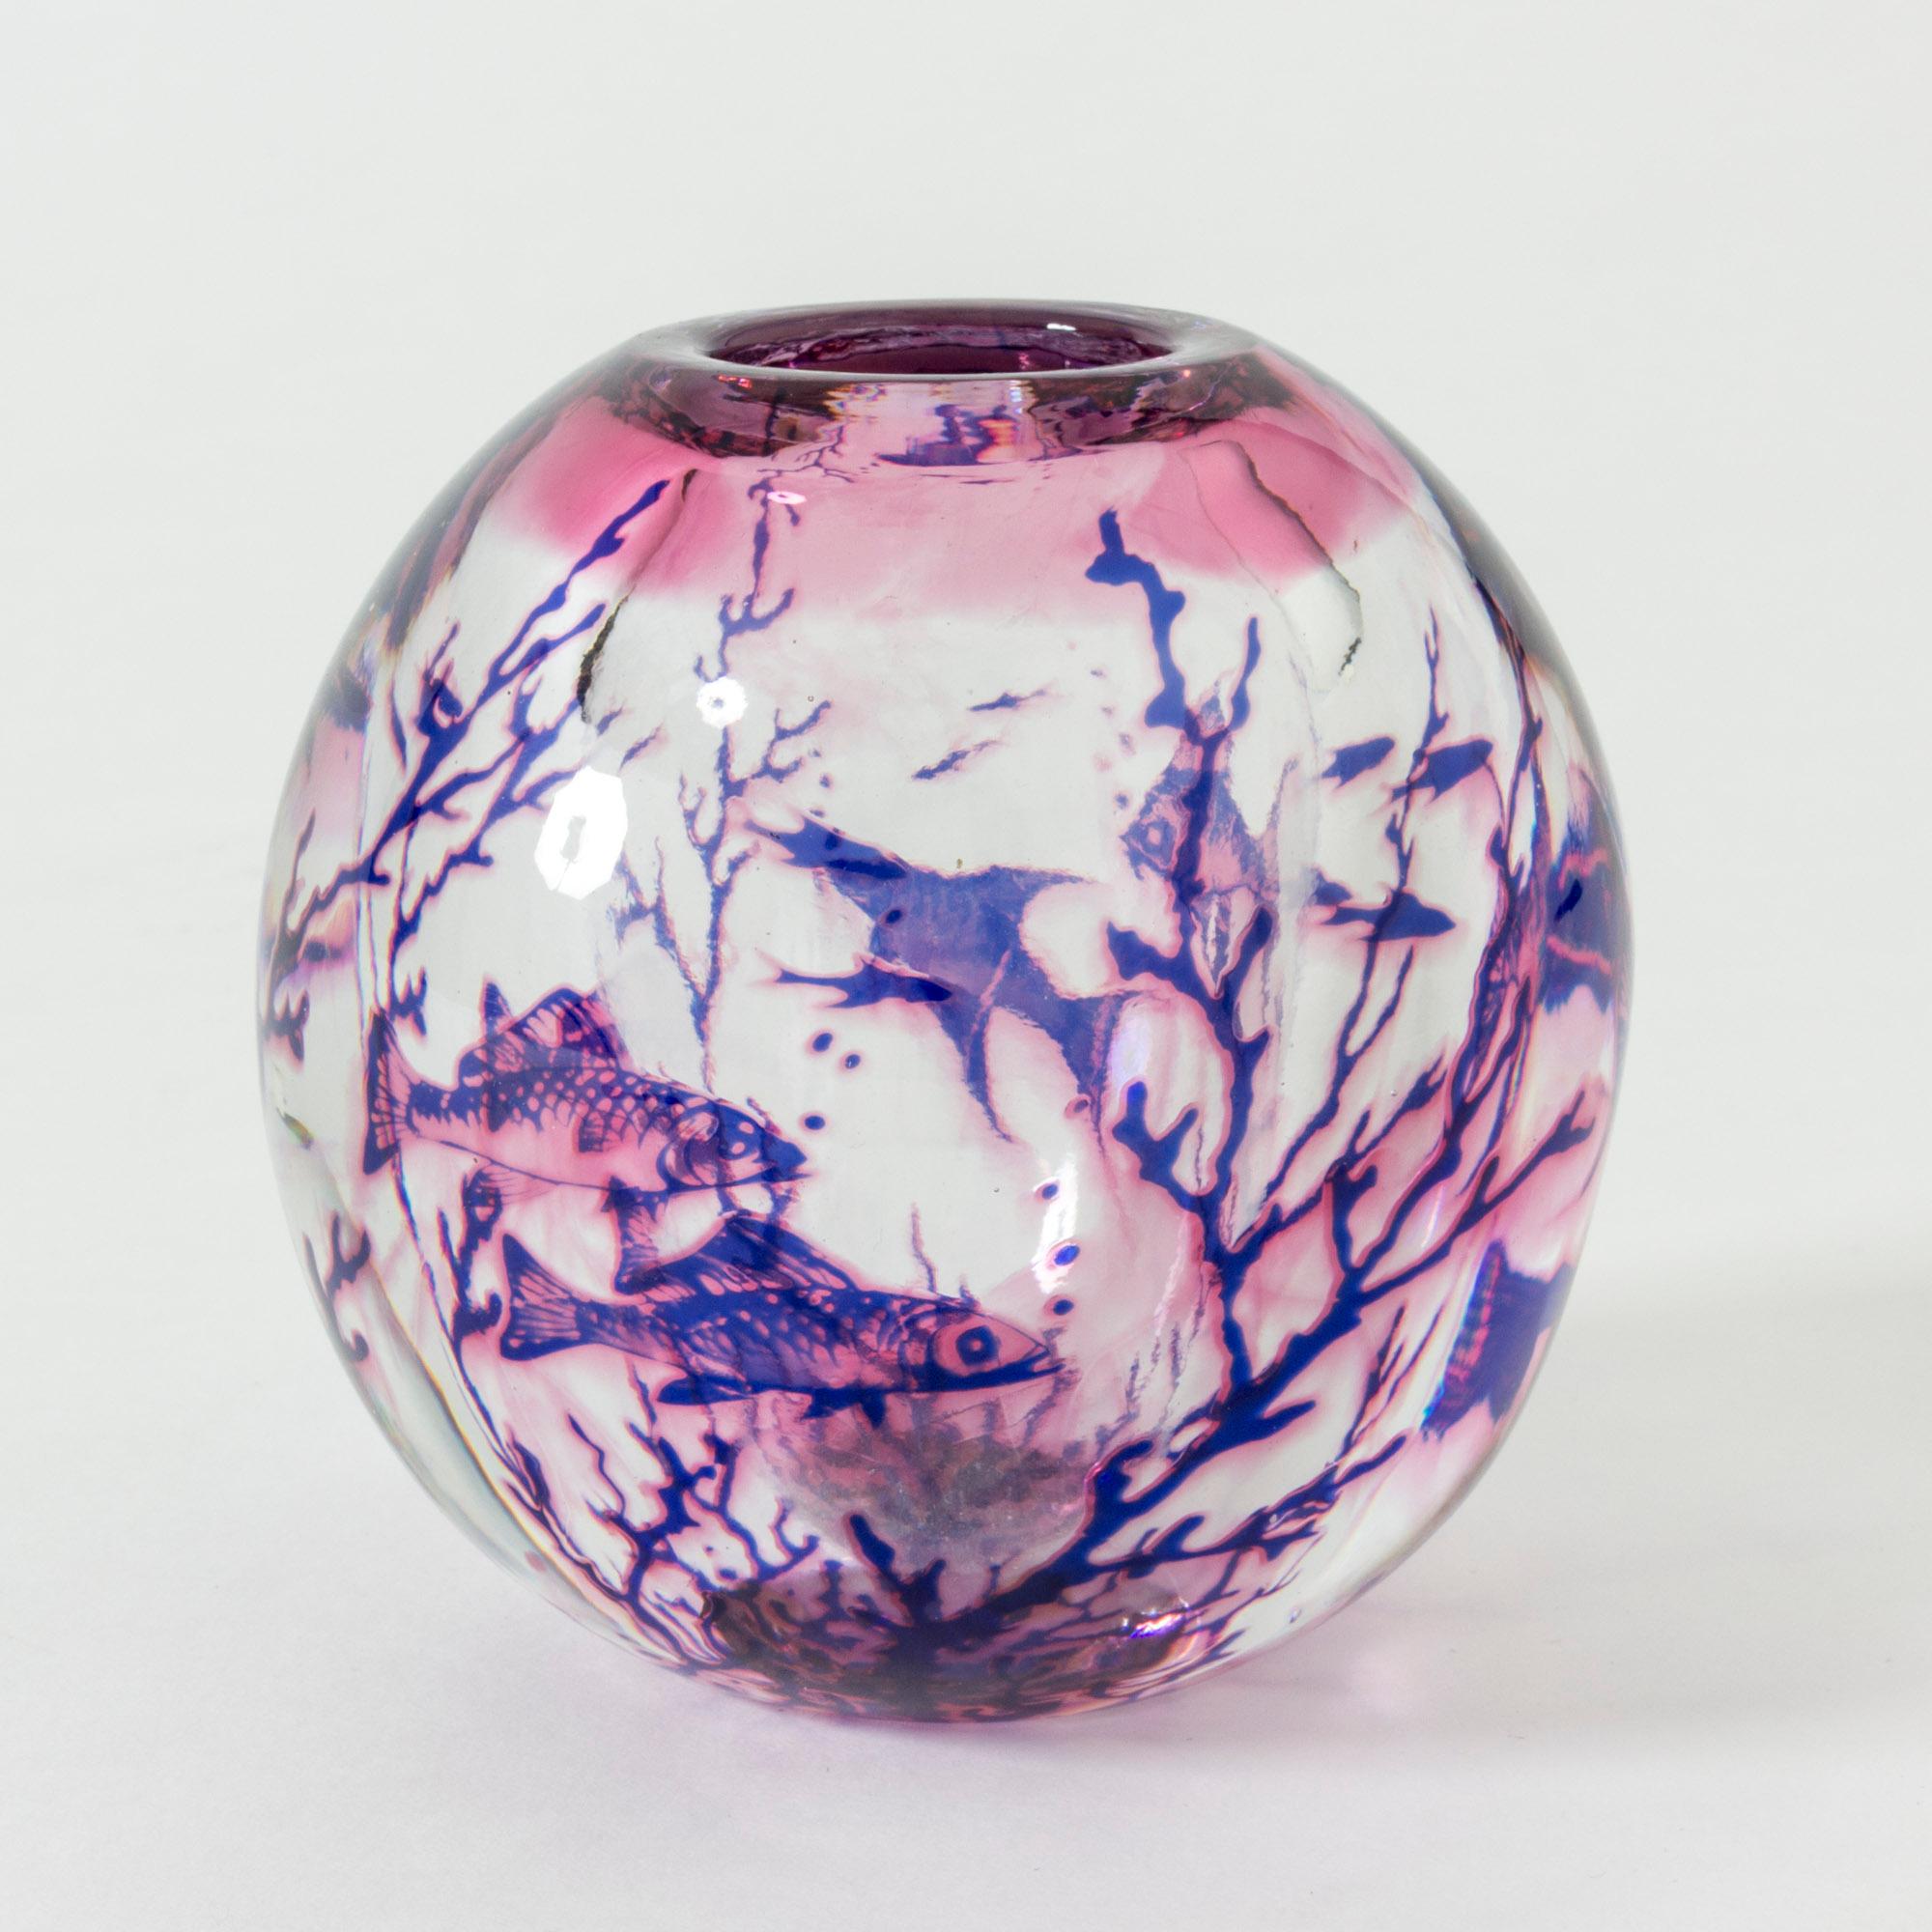 Stunning graal vase by Edward Hald, in an early edition with a rare color combination of blue and purple. Beautiful underwater motif of fish, where the layers of glass create a lively, watery effect.